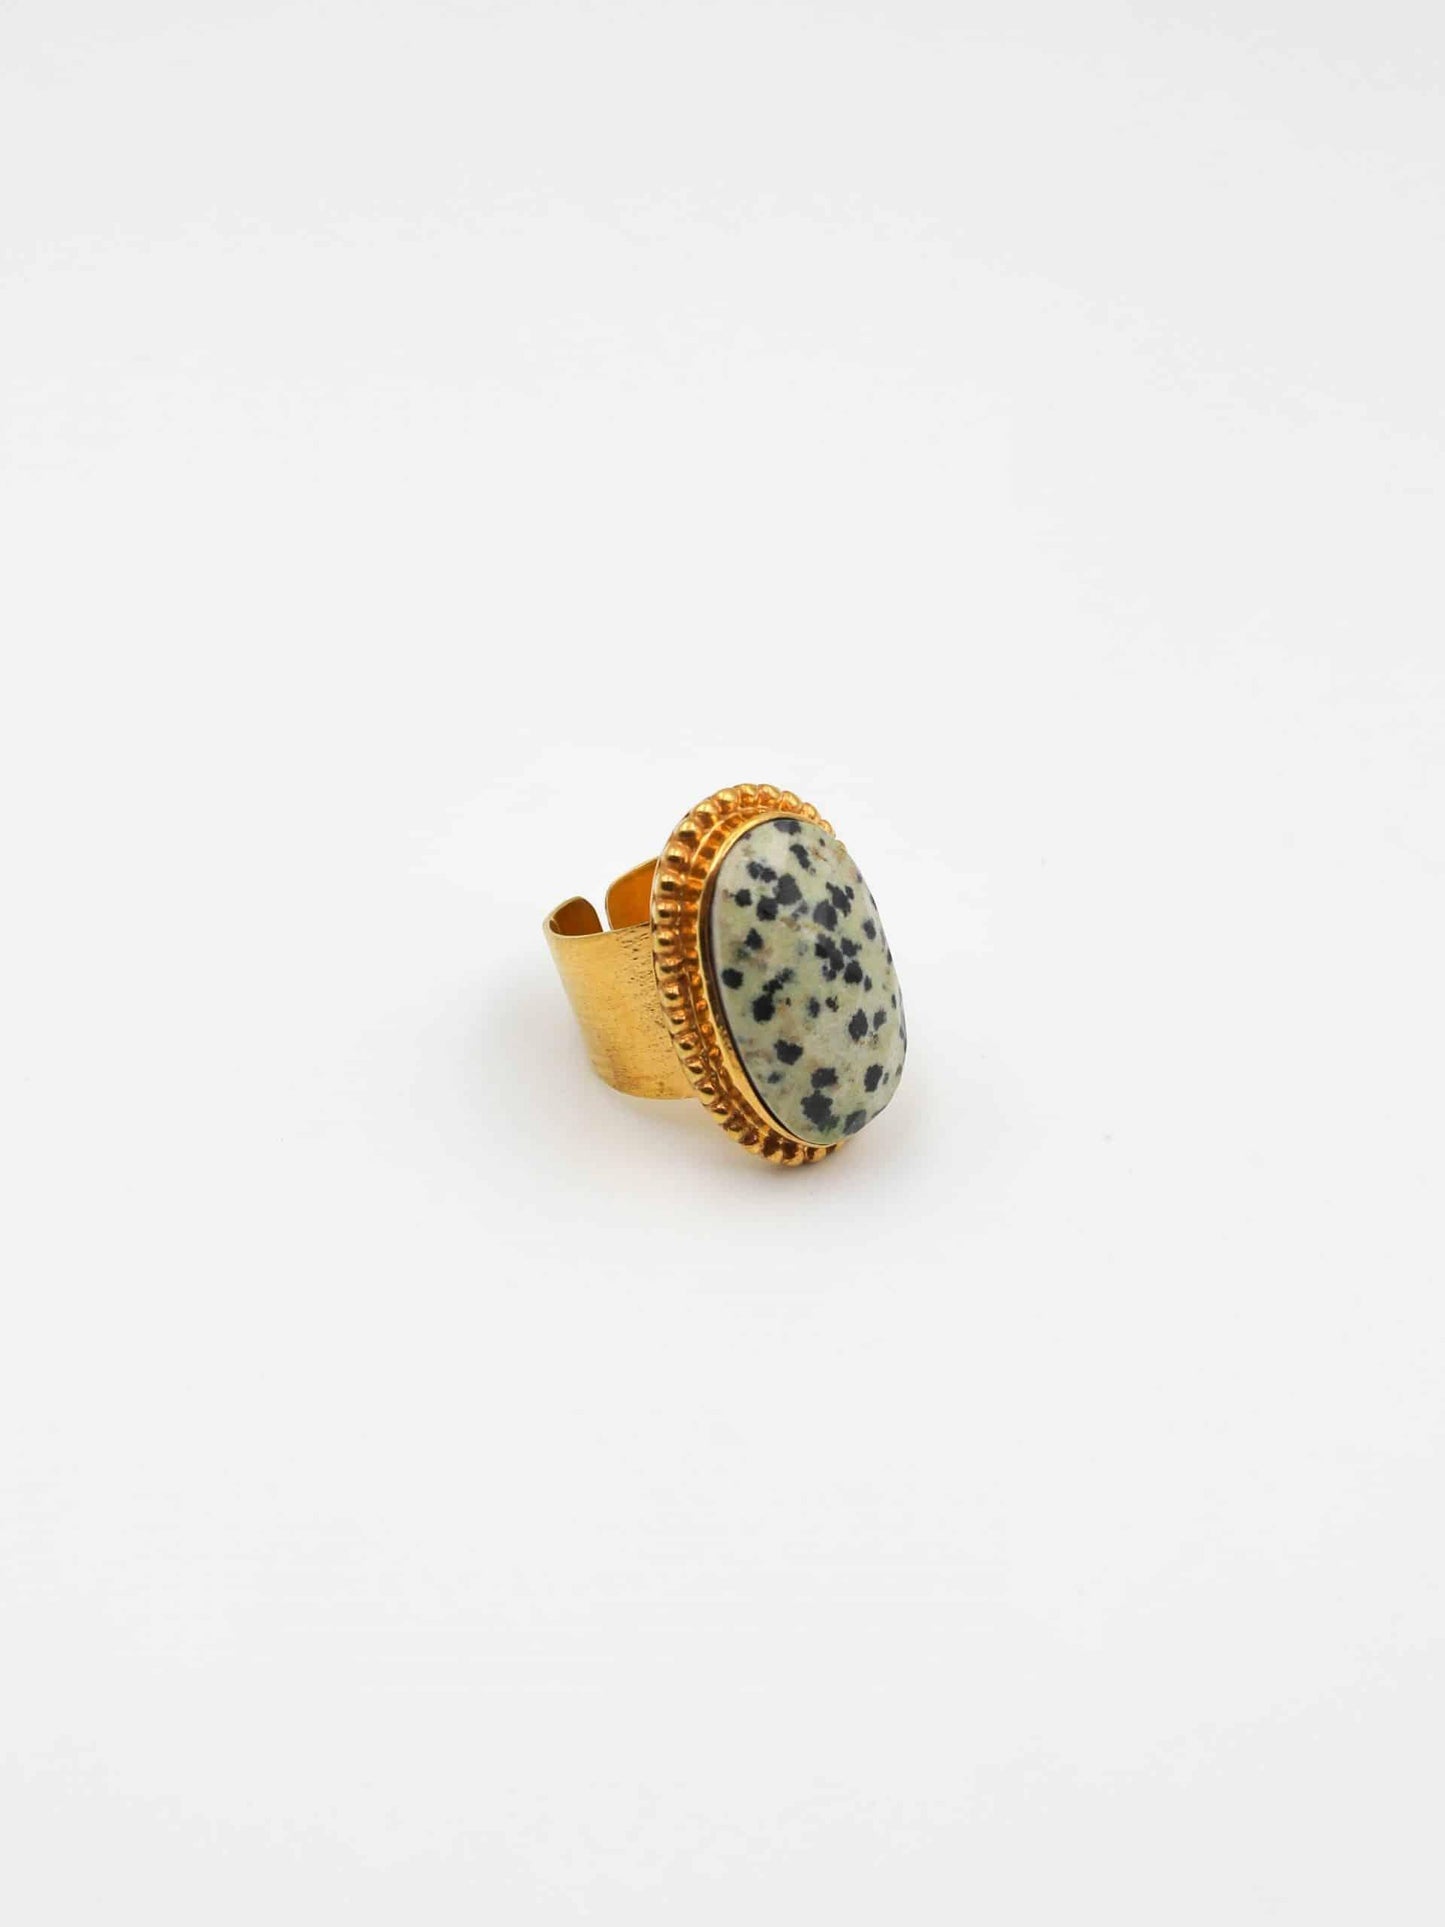 Cameo ring